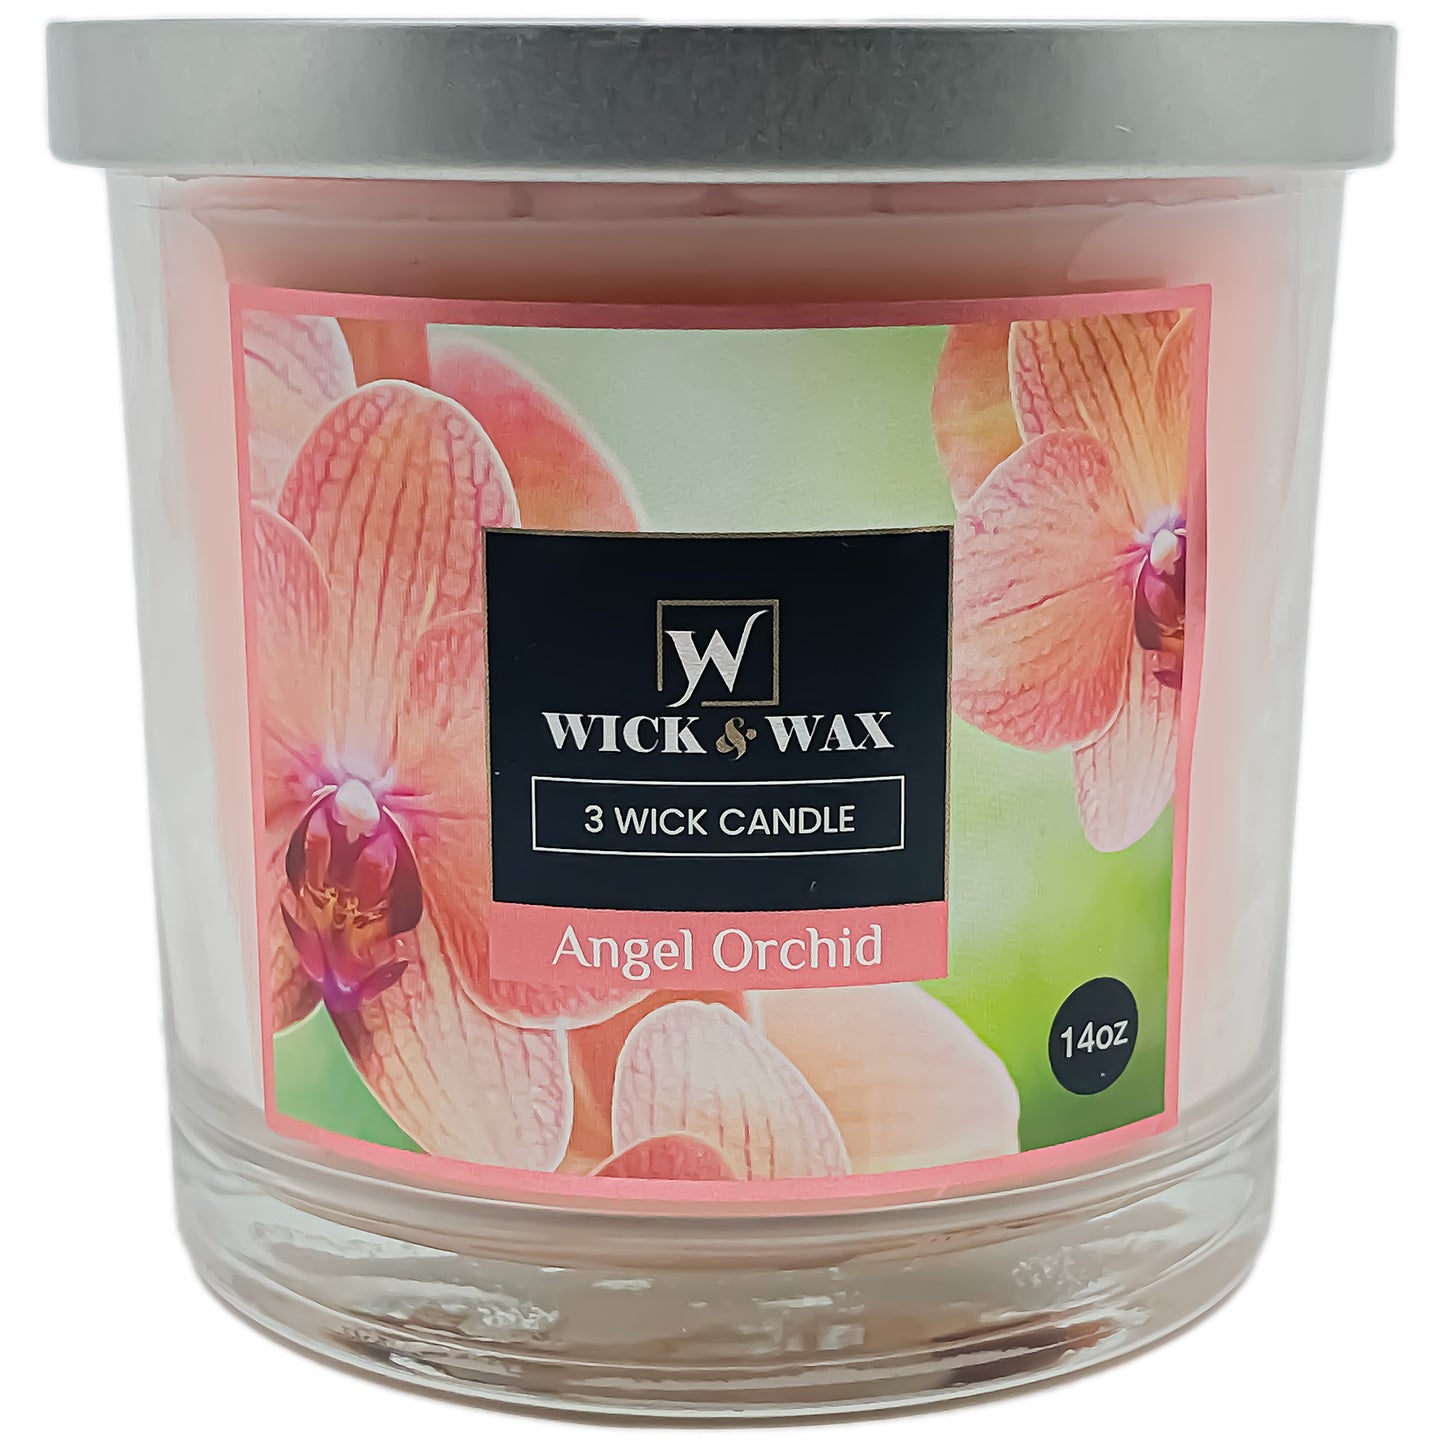 Angel Orchid Scented Jar Candle (3-wick) - 14oz.  WICK & WAX   